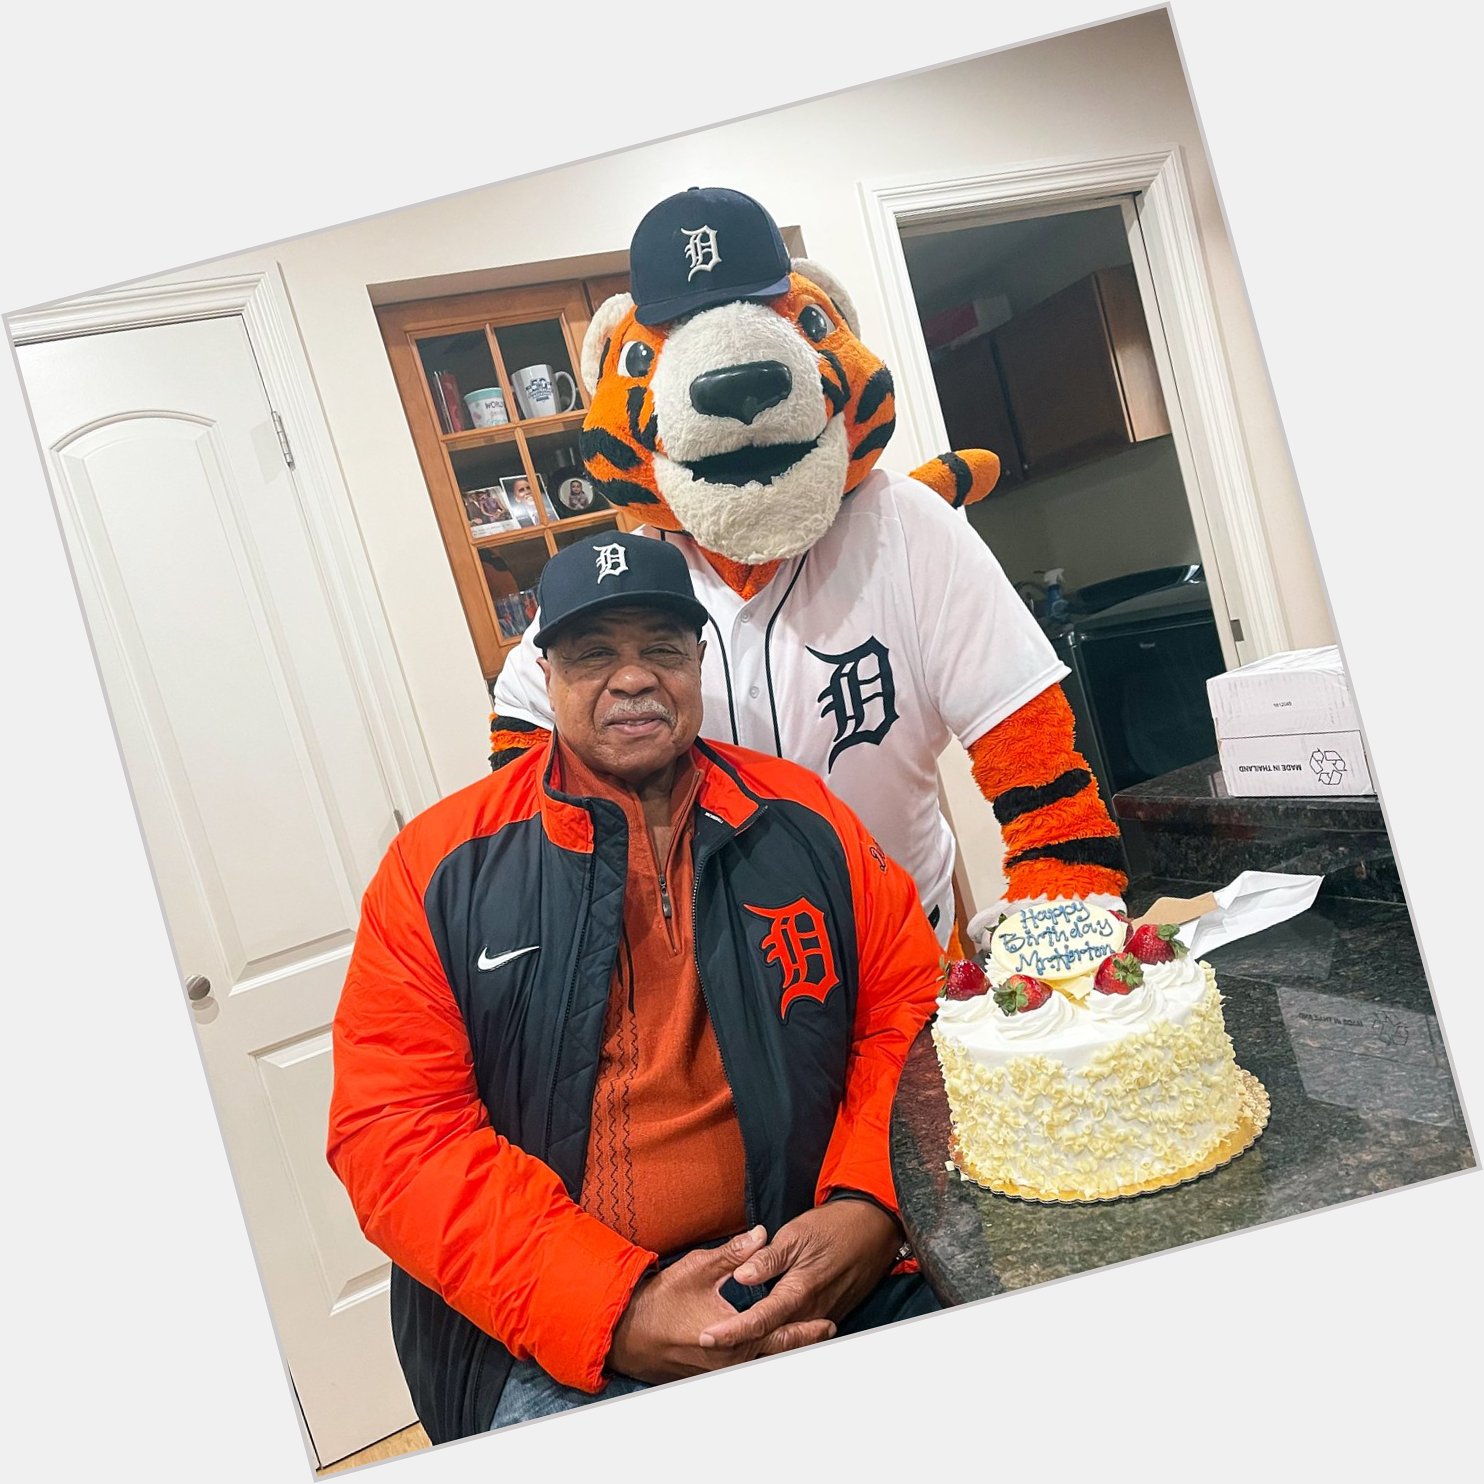 Knock knock, it\s a special delivery for Willie Horton!

Happy birthday to one of my favorite Tigers! 